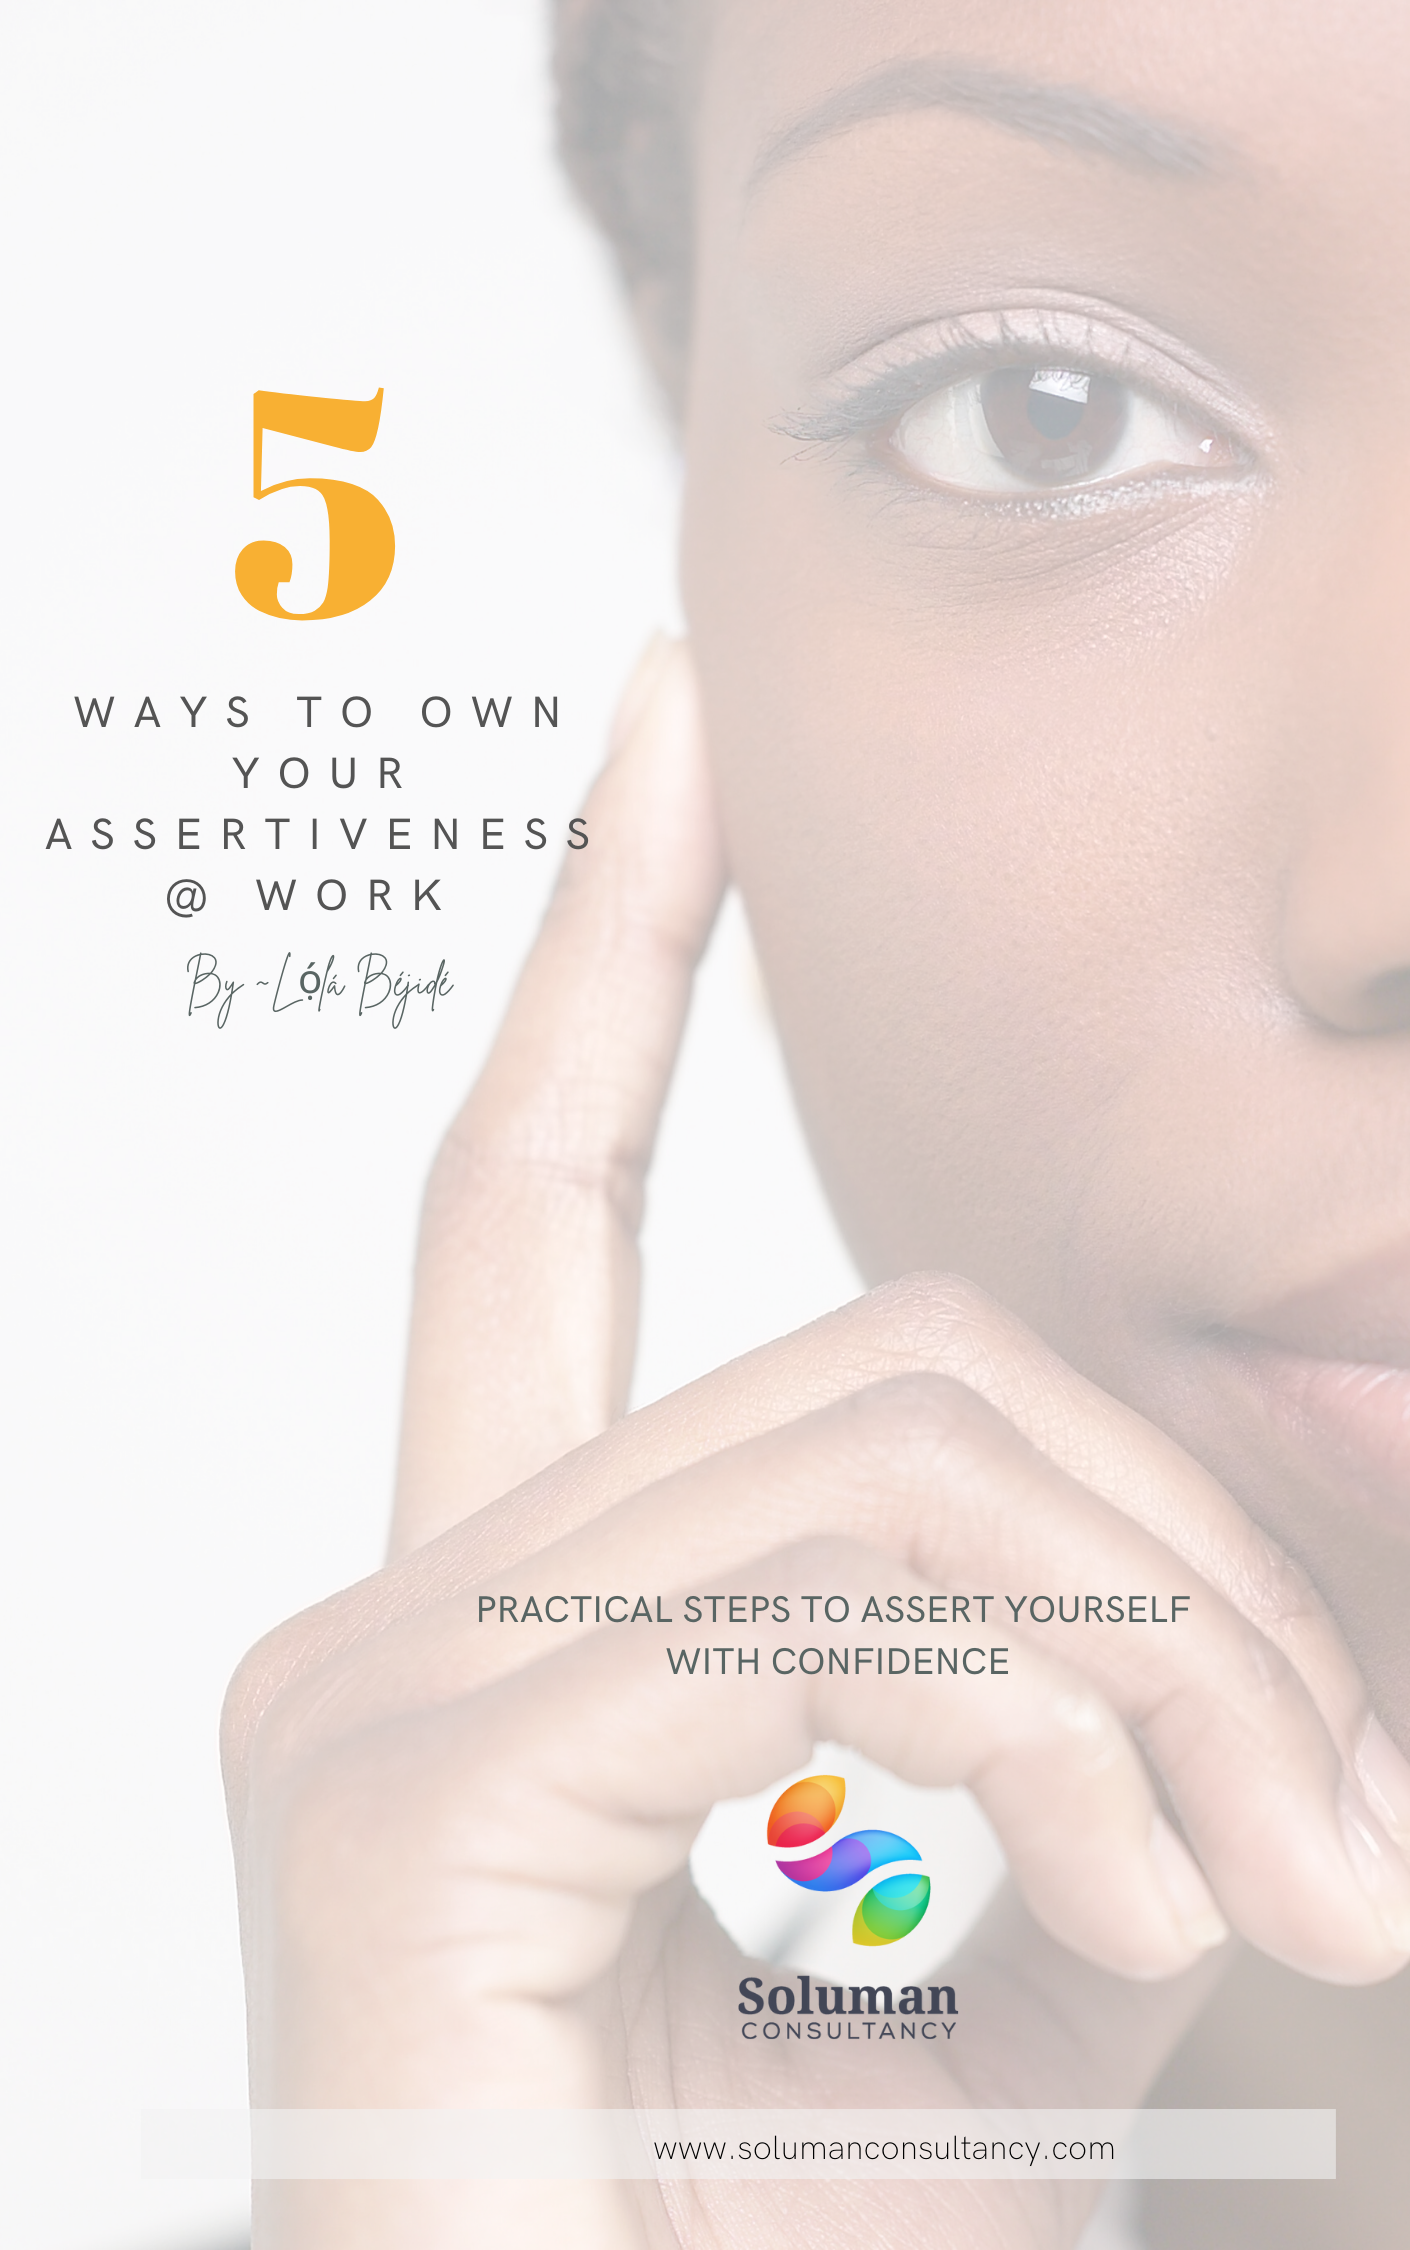 5 Ways to own your assertiveness @ Work - cover-1